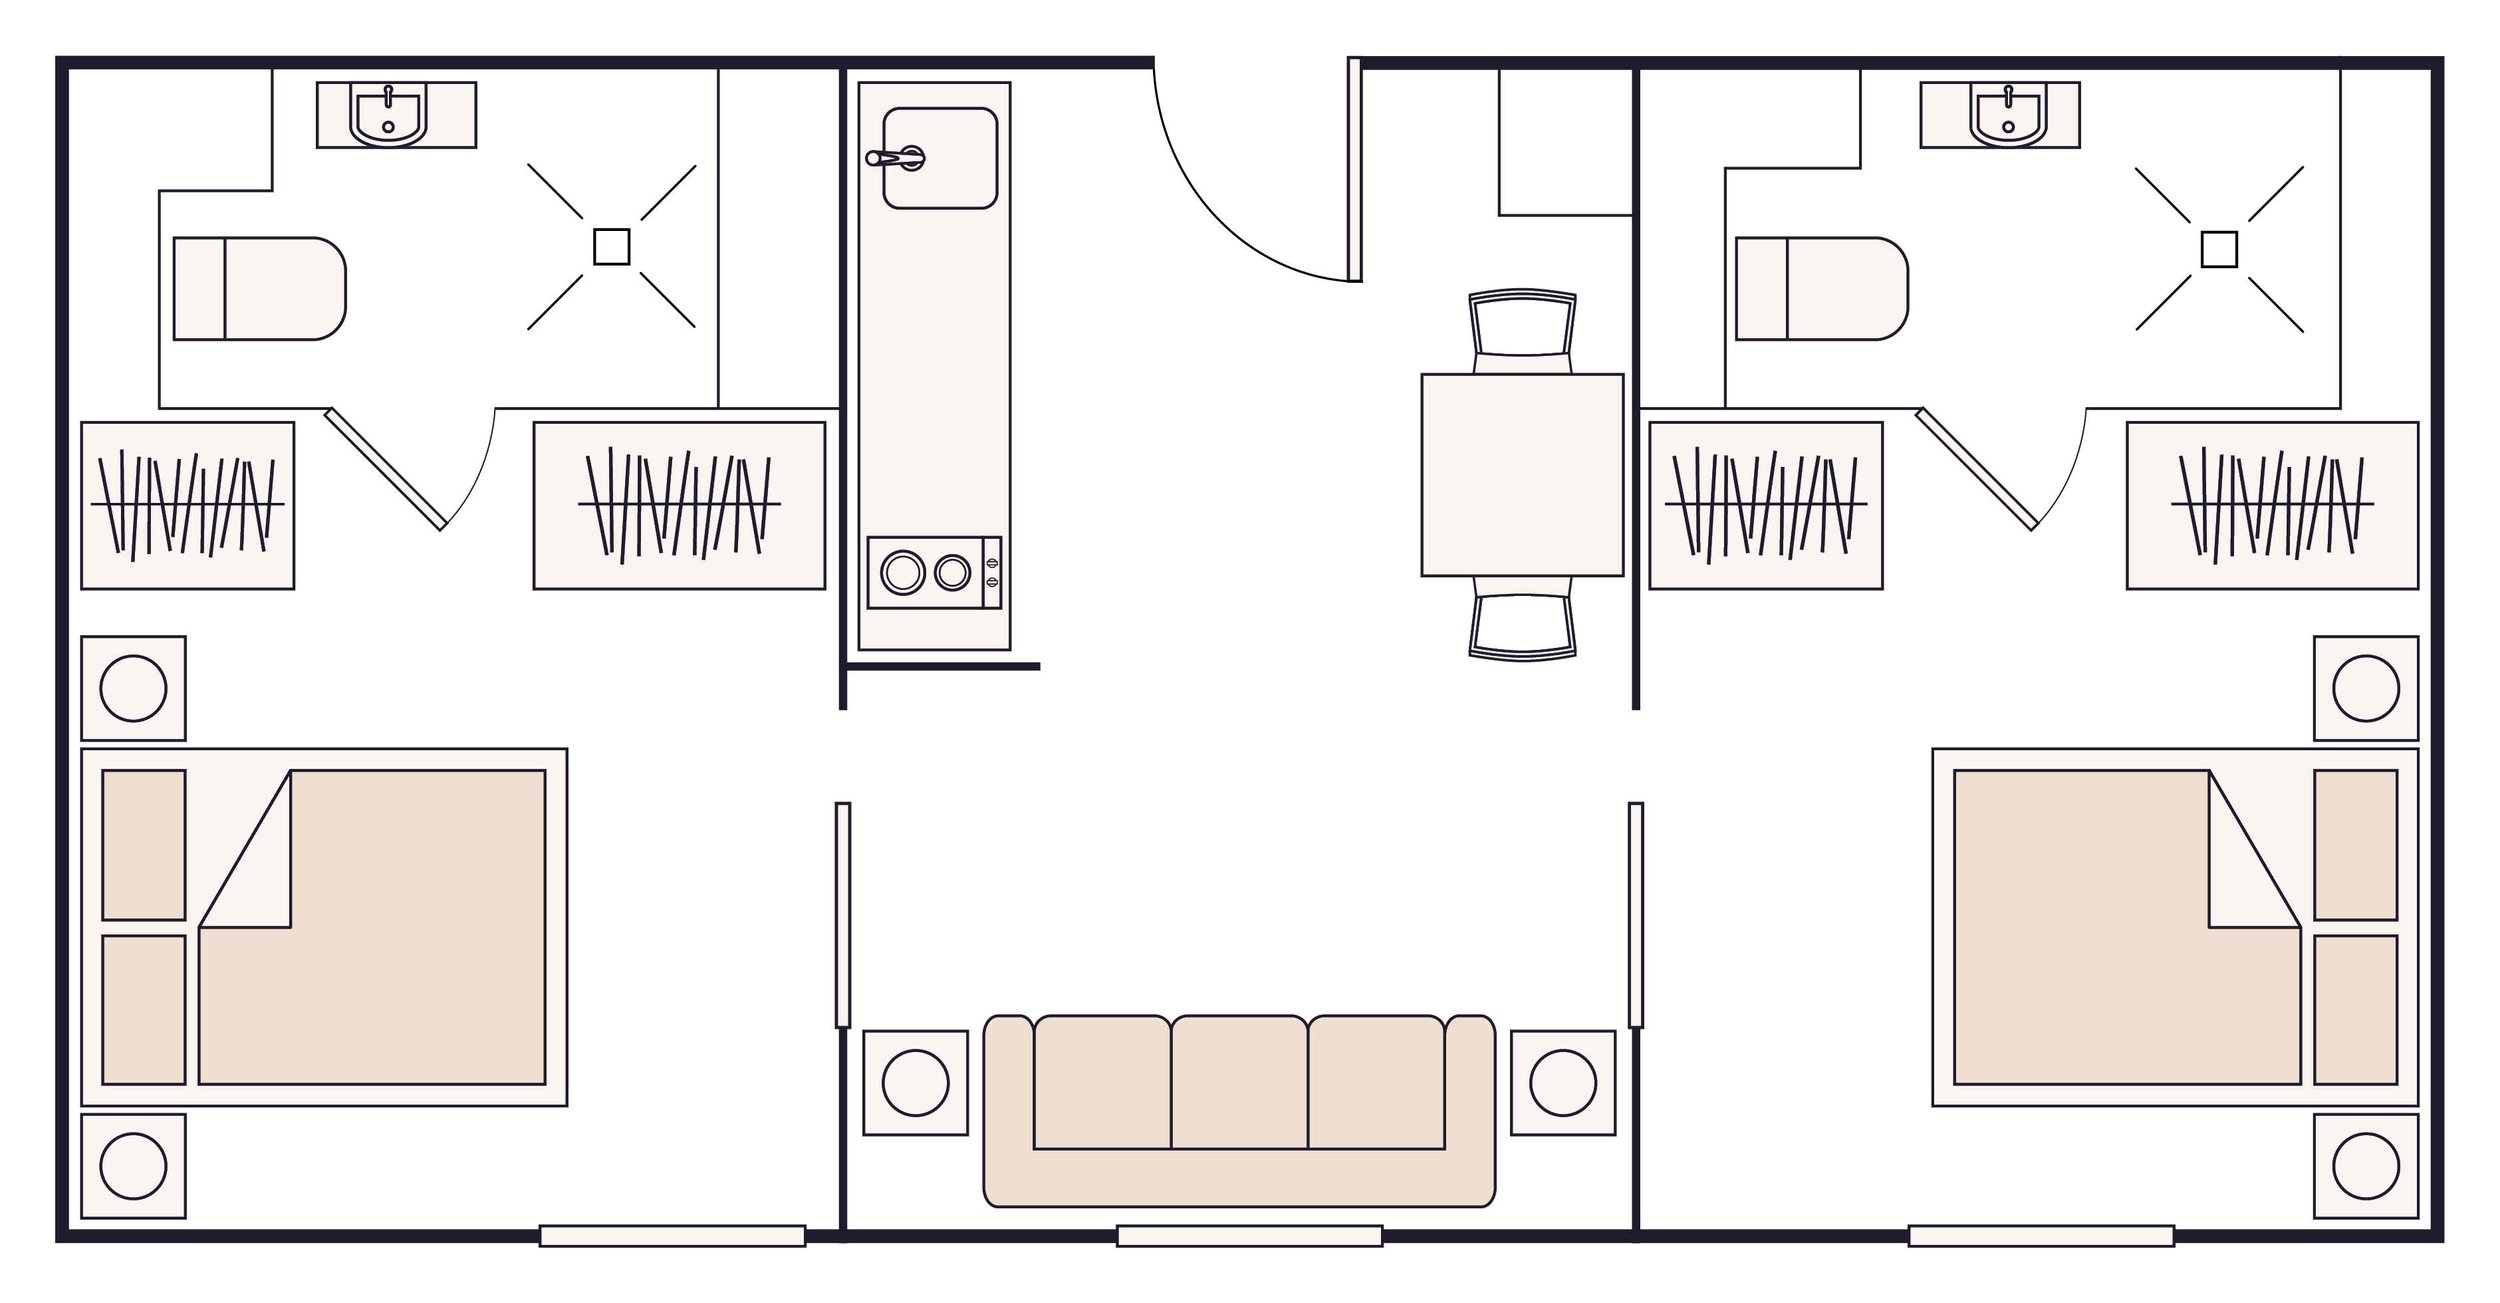 24088-Abstract-Floorplans-Jul23-Two-Bed-Apartment.jpg